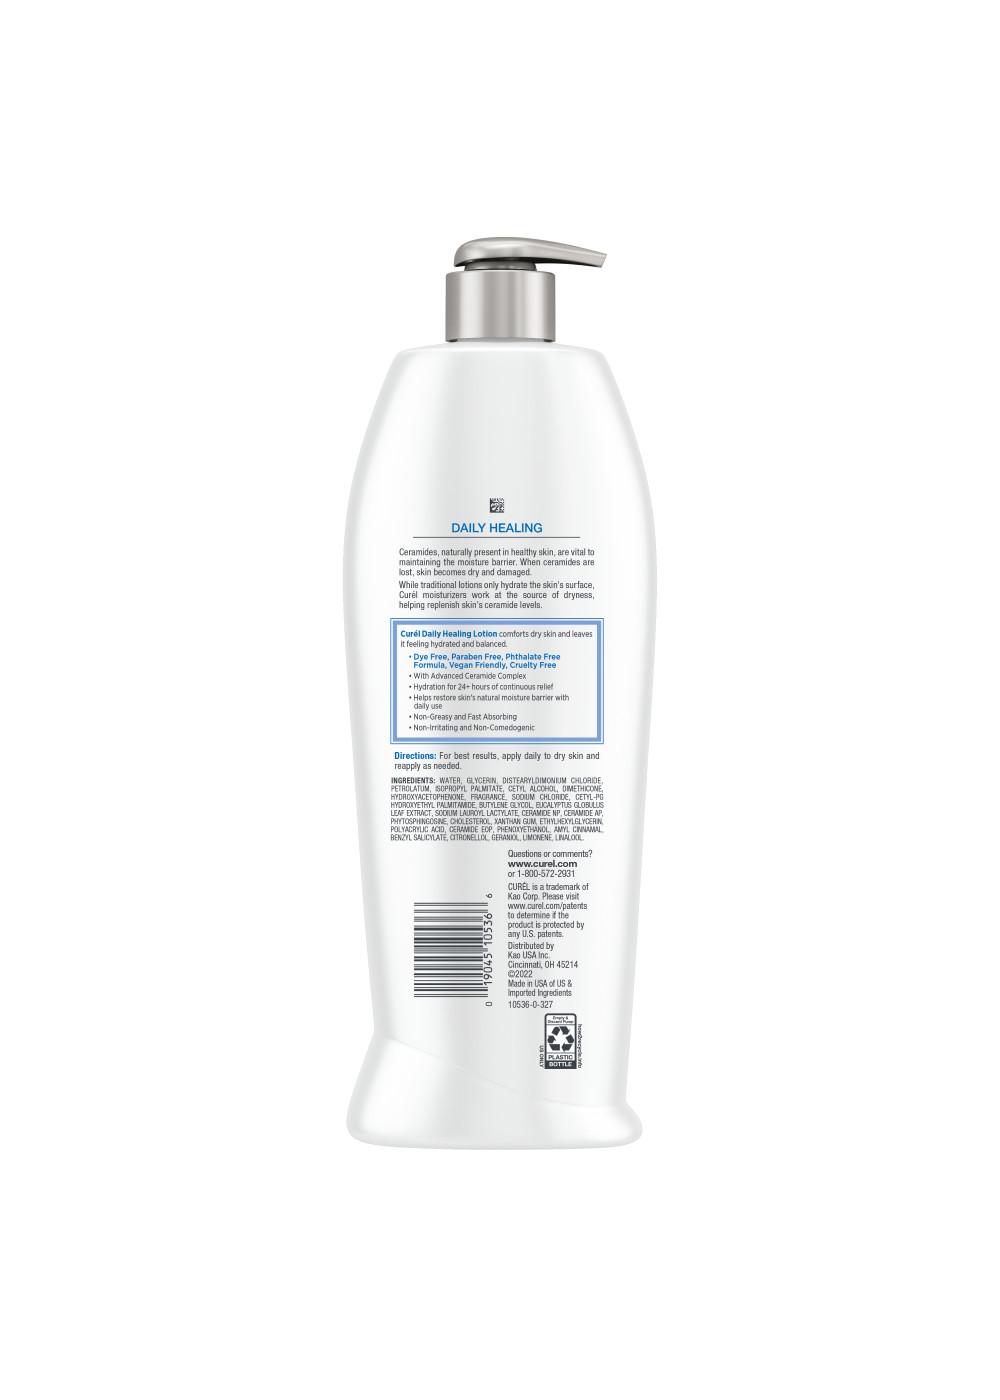 Curel Daily Healing Body Lotion; image 9 of 10